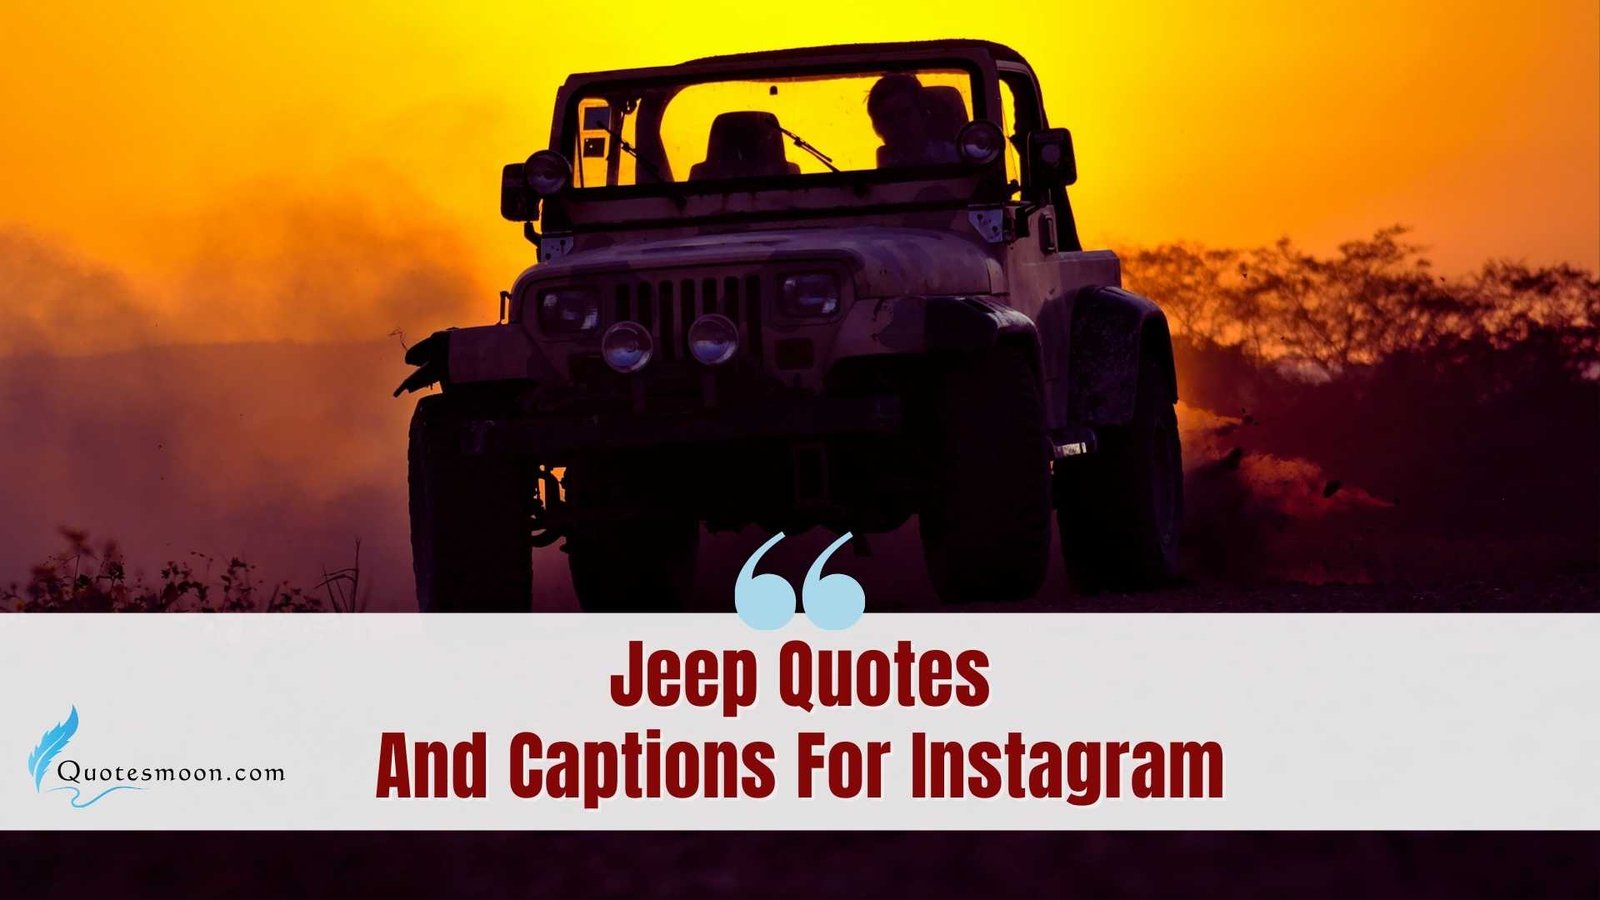 Jeep Quotes And Captions For Instagram